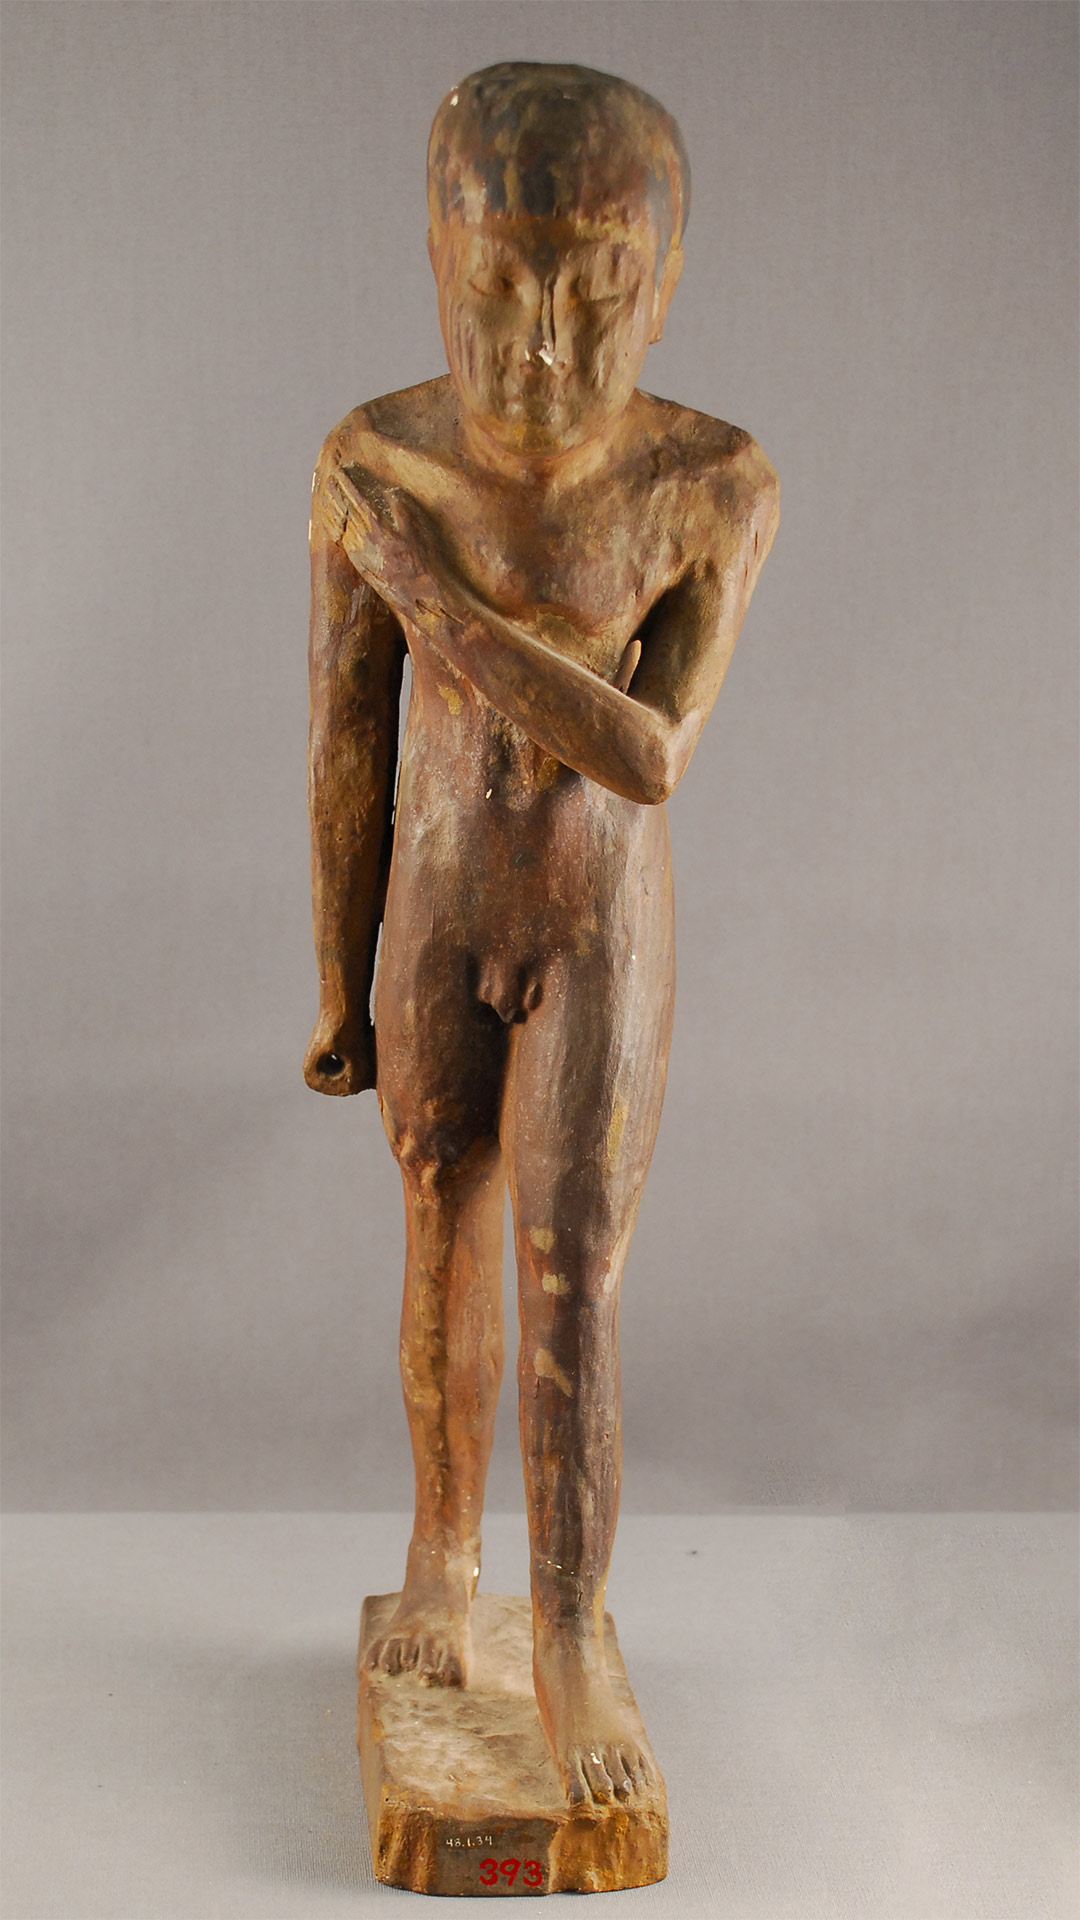 figurine of a man with a curved spine, showing the man striding with his left leg, emphasizing the curved spine with his right hand